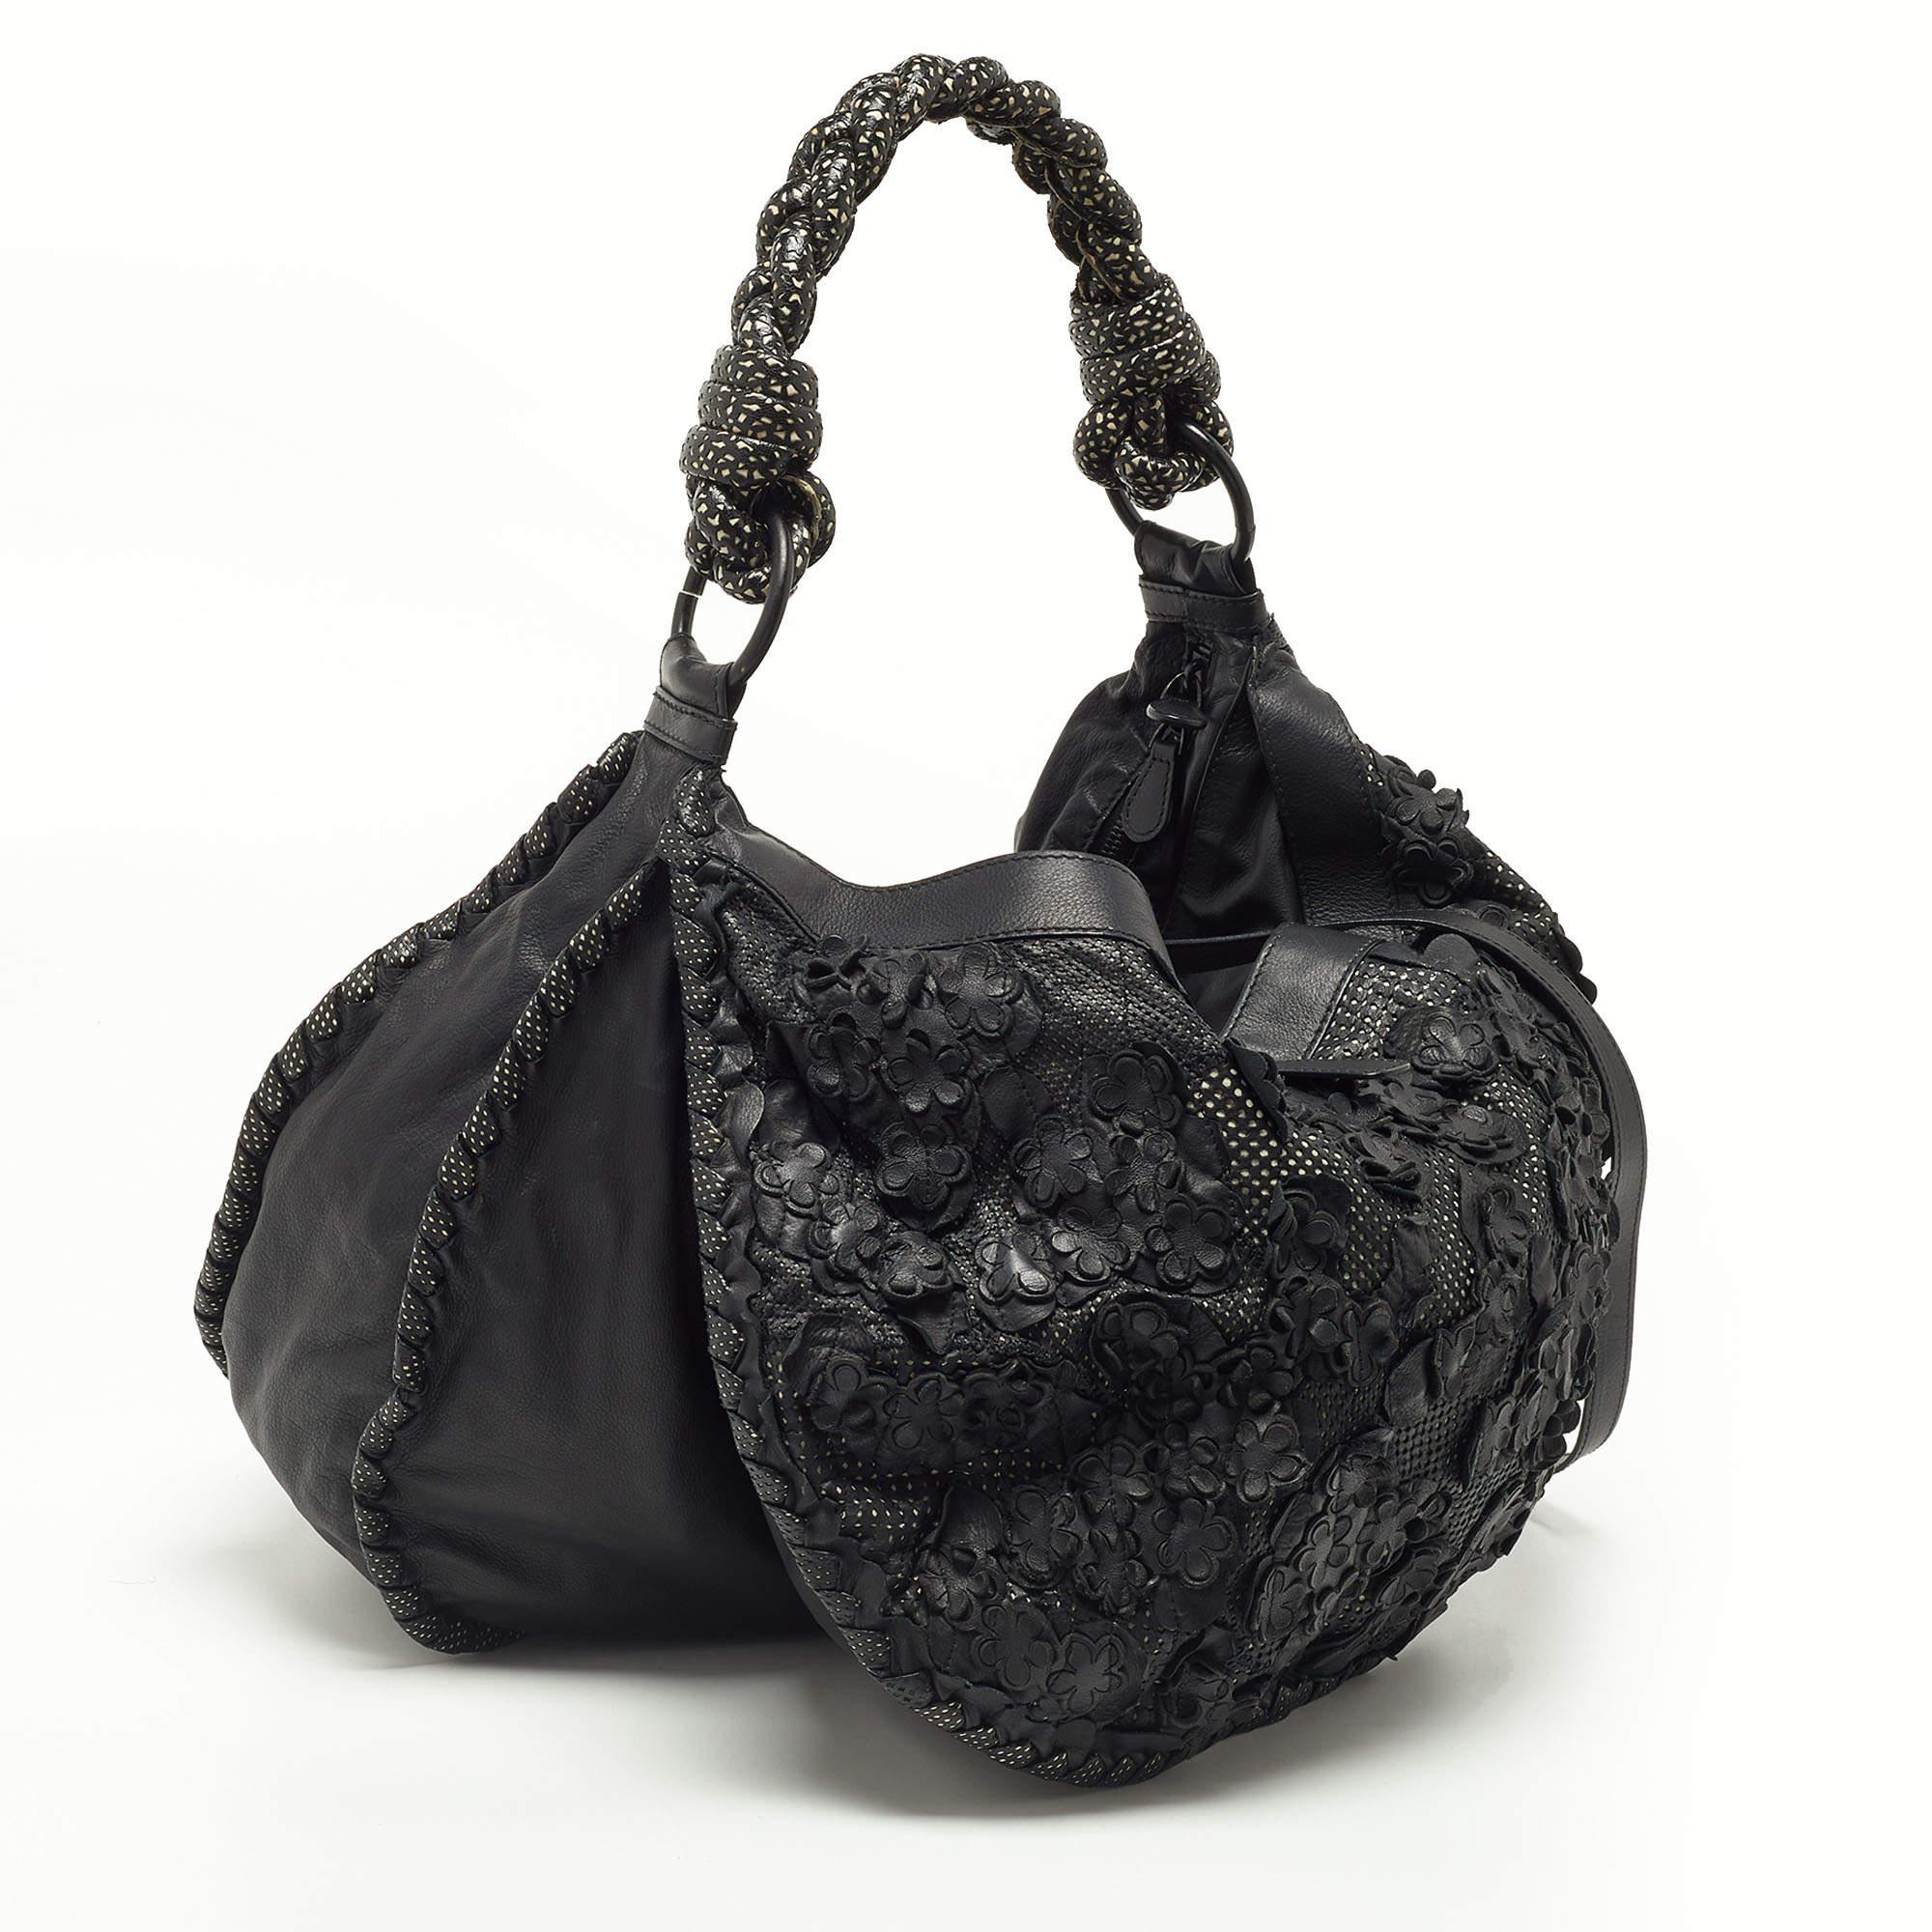 Stylish handbags never fail to make a fashionable impression. Make this designer hobo yours by pairing it with your sophisticated workwear as well as chic casual looks.

